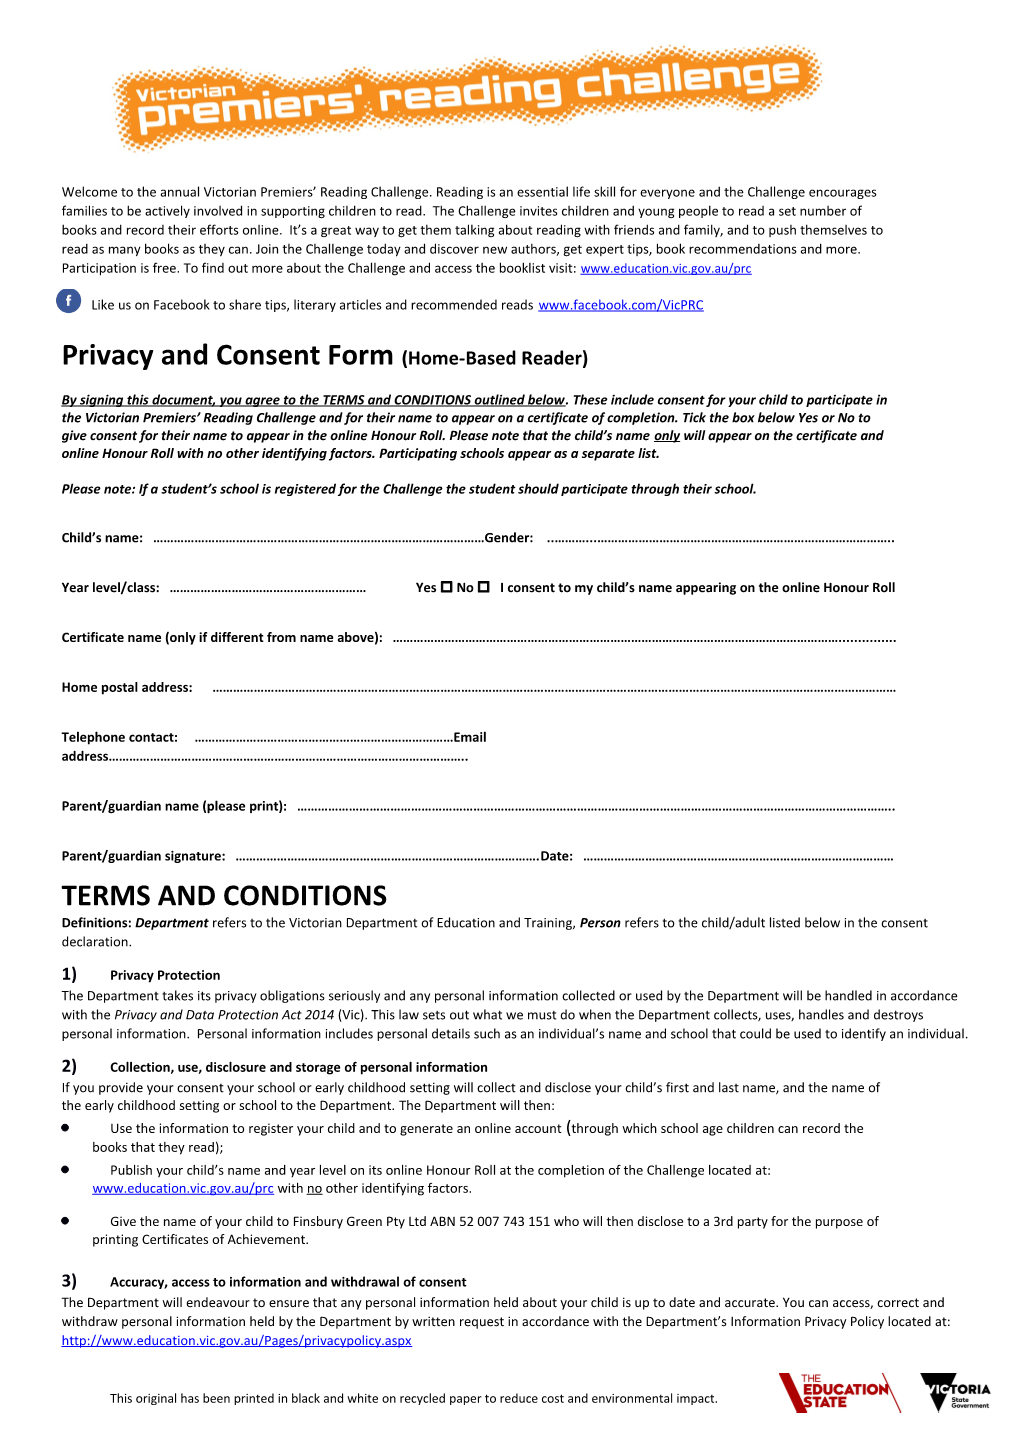 PRC Privacy Consent Form - Home Based Reader Email Incl